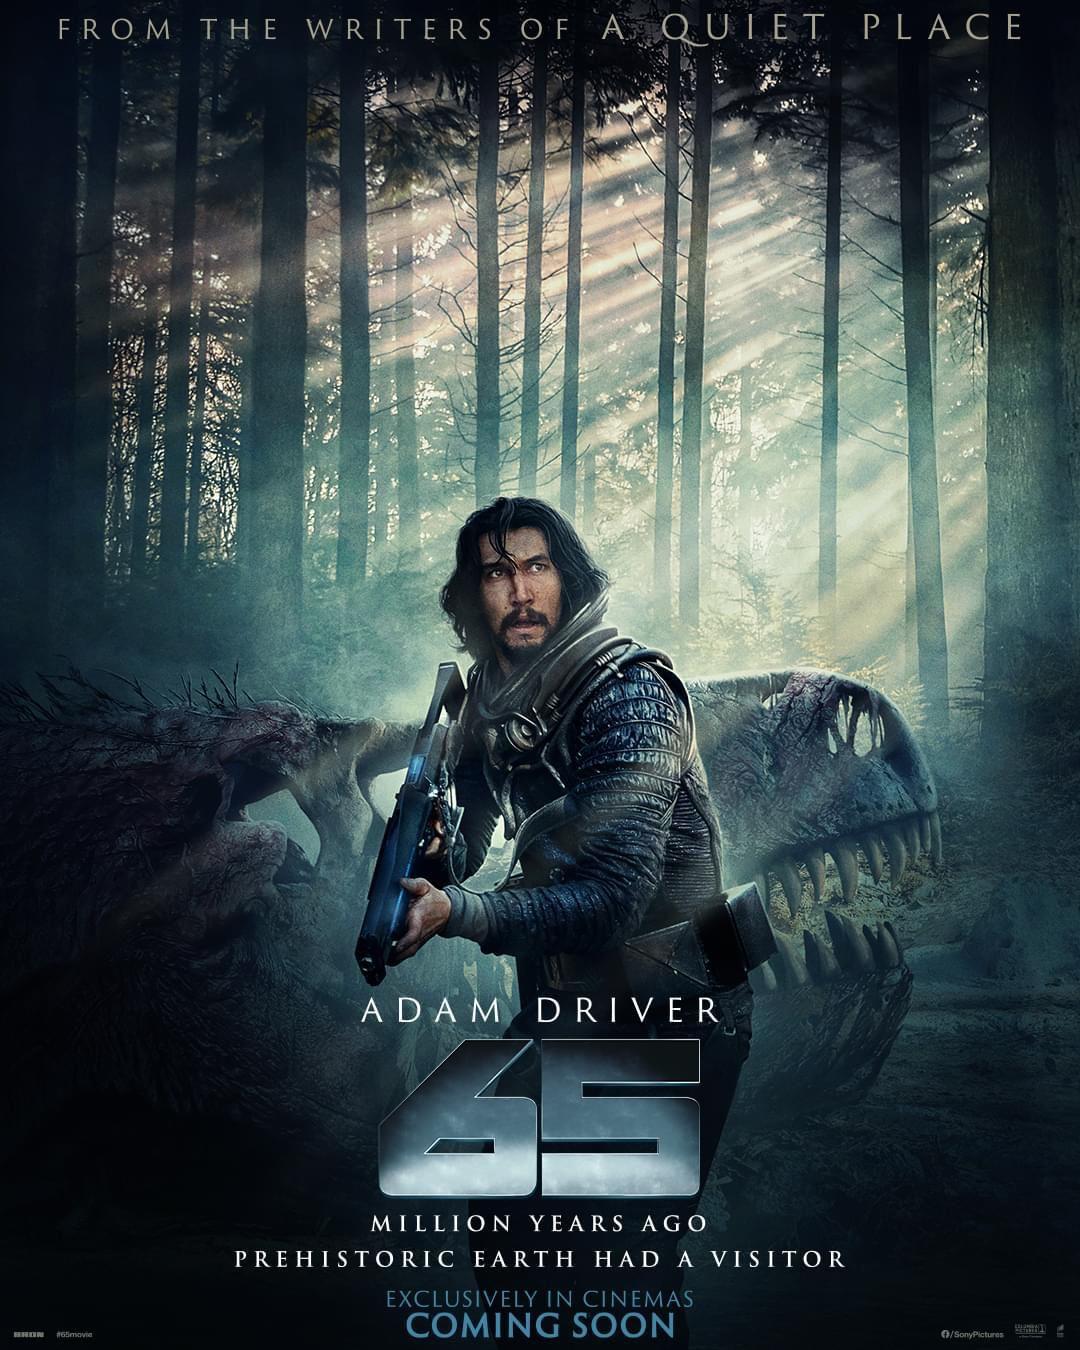 Adam Driver fights dinosaurs in prehistoric times in actionpacked